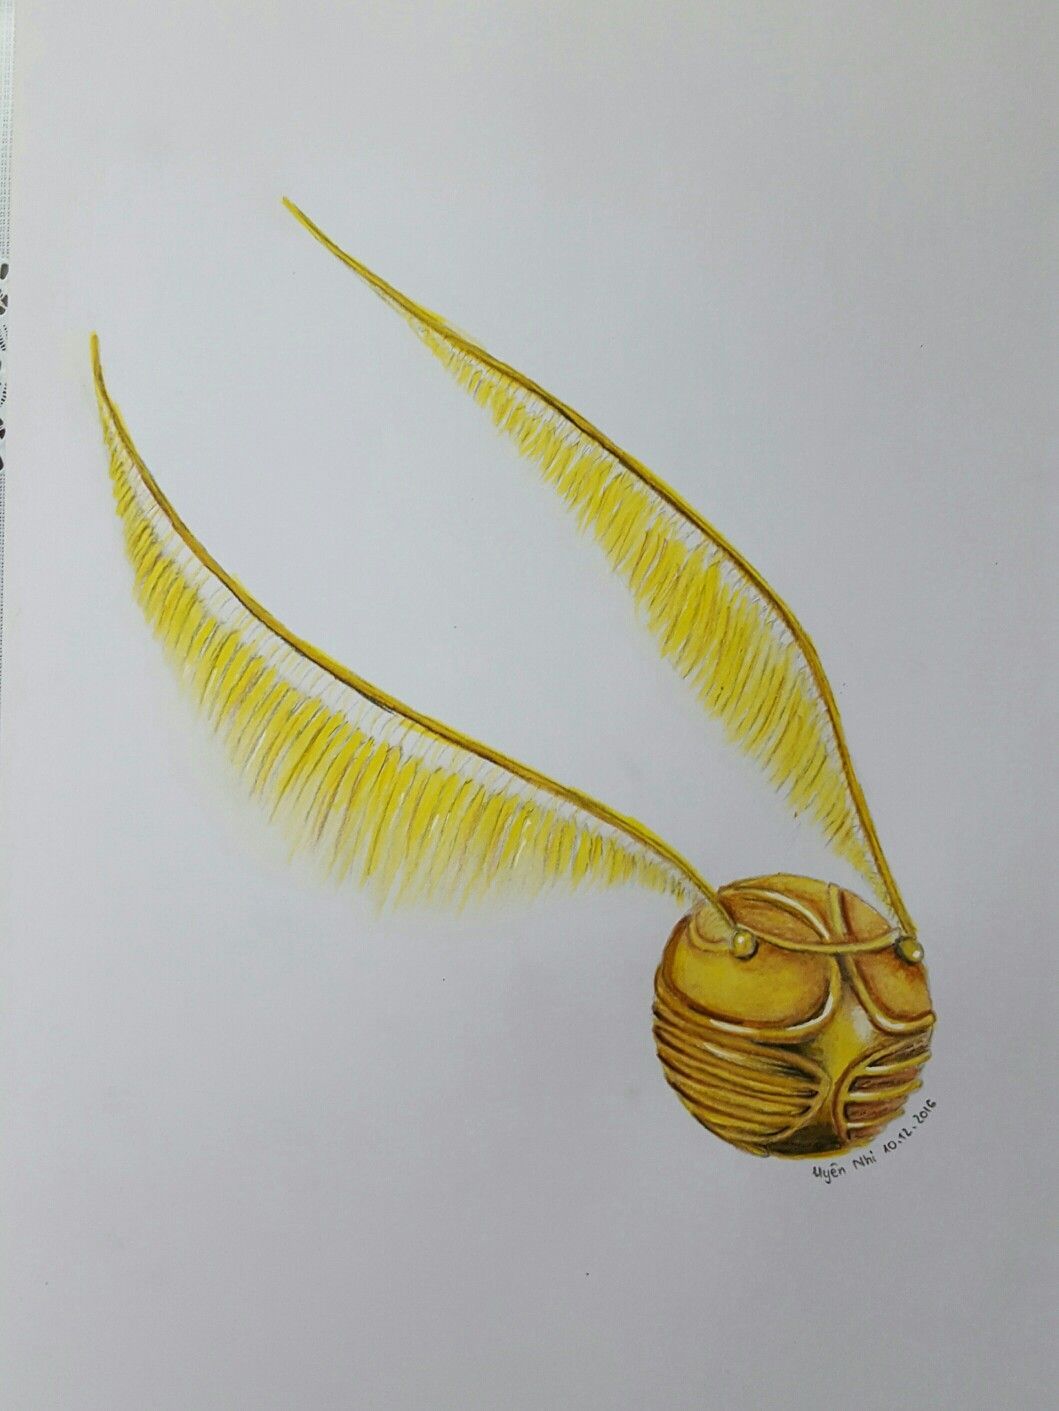 Harry potter. Harry potter drawings, Harry potter snitch, Harry potter painting